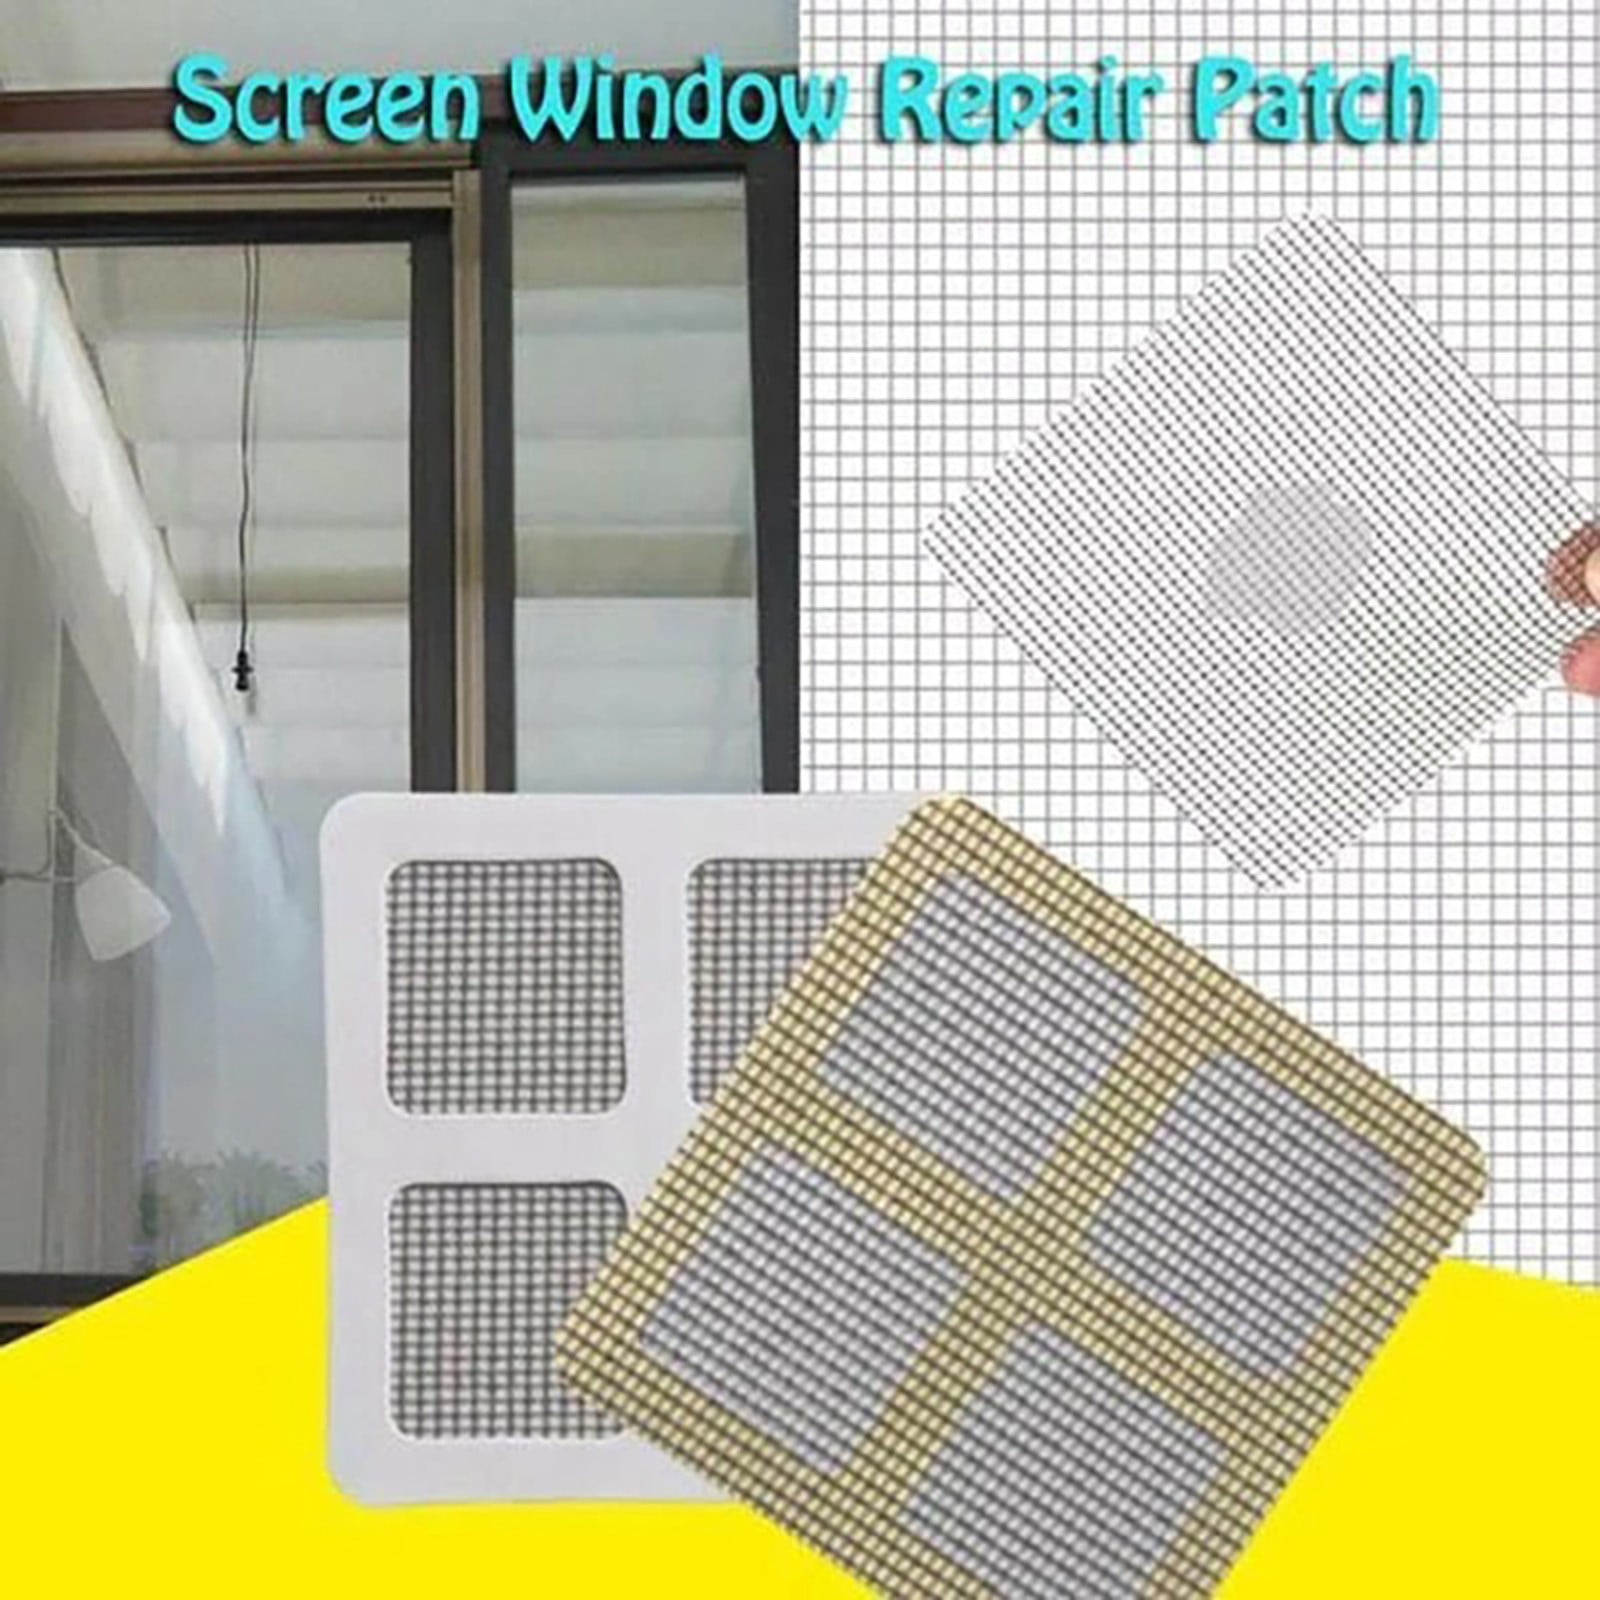 30pcs New Home Window Repair Black Patches Fill Hole Network Fix Your Net Window 